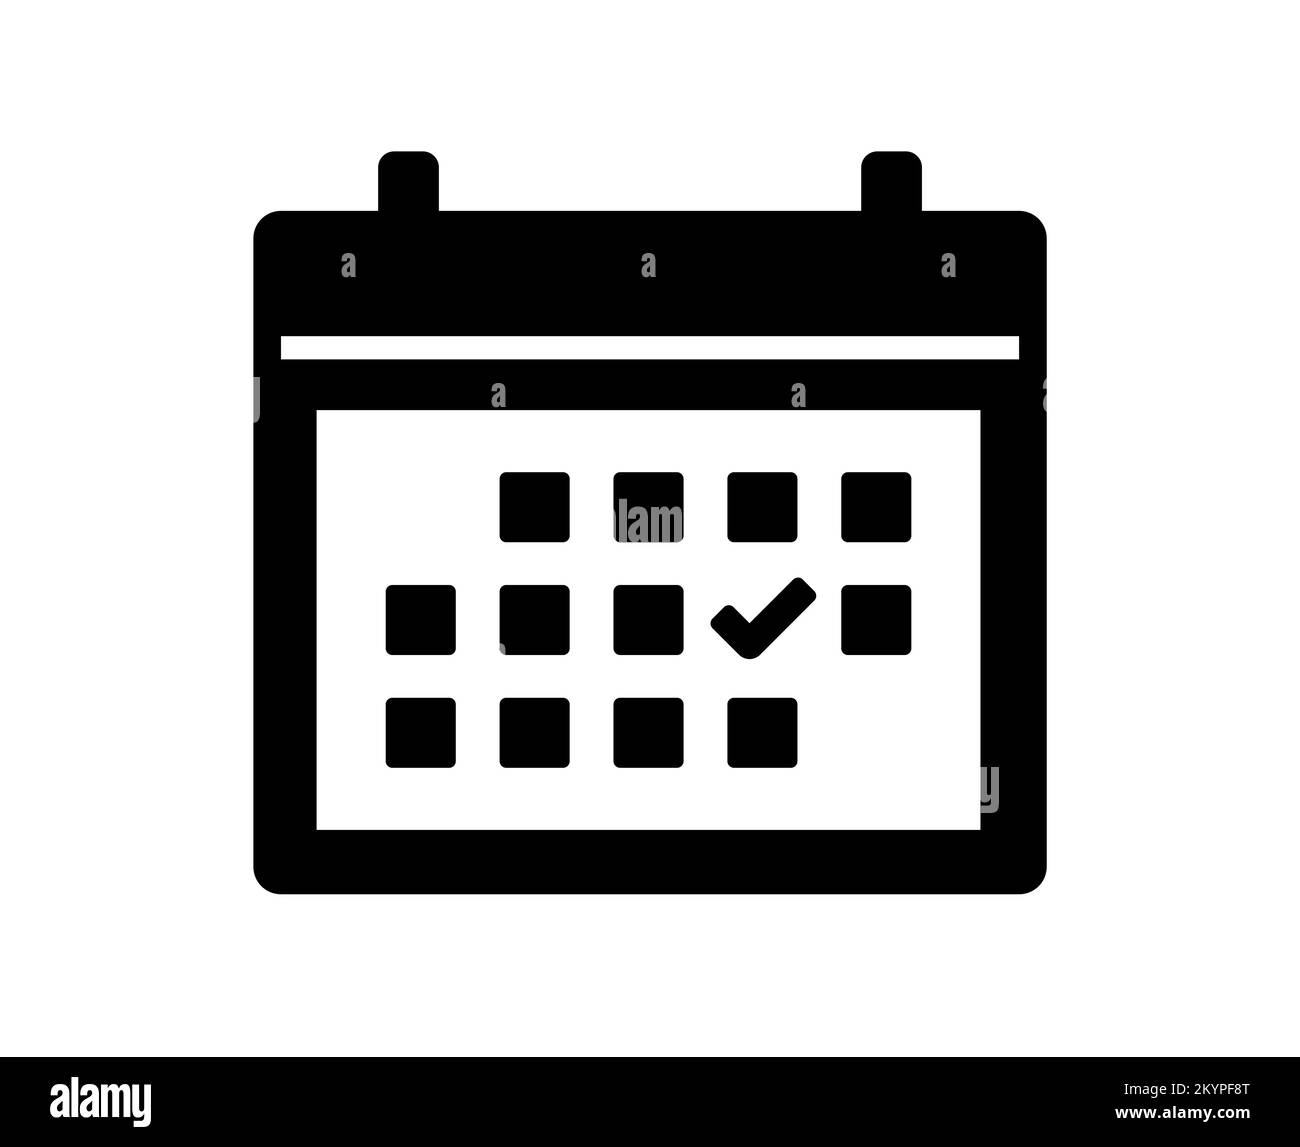 Schedule or calendar appointment date vector illustration icon Stock Vector